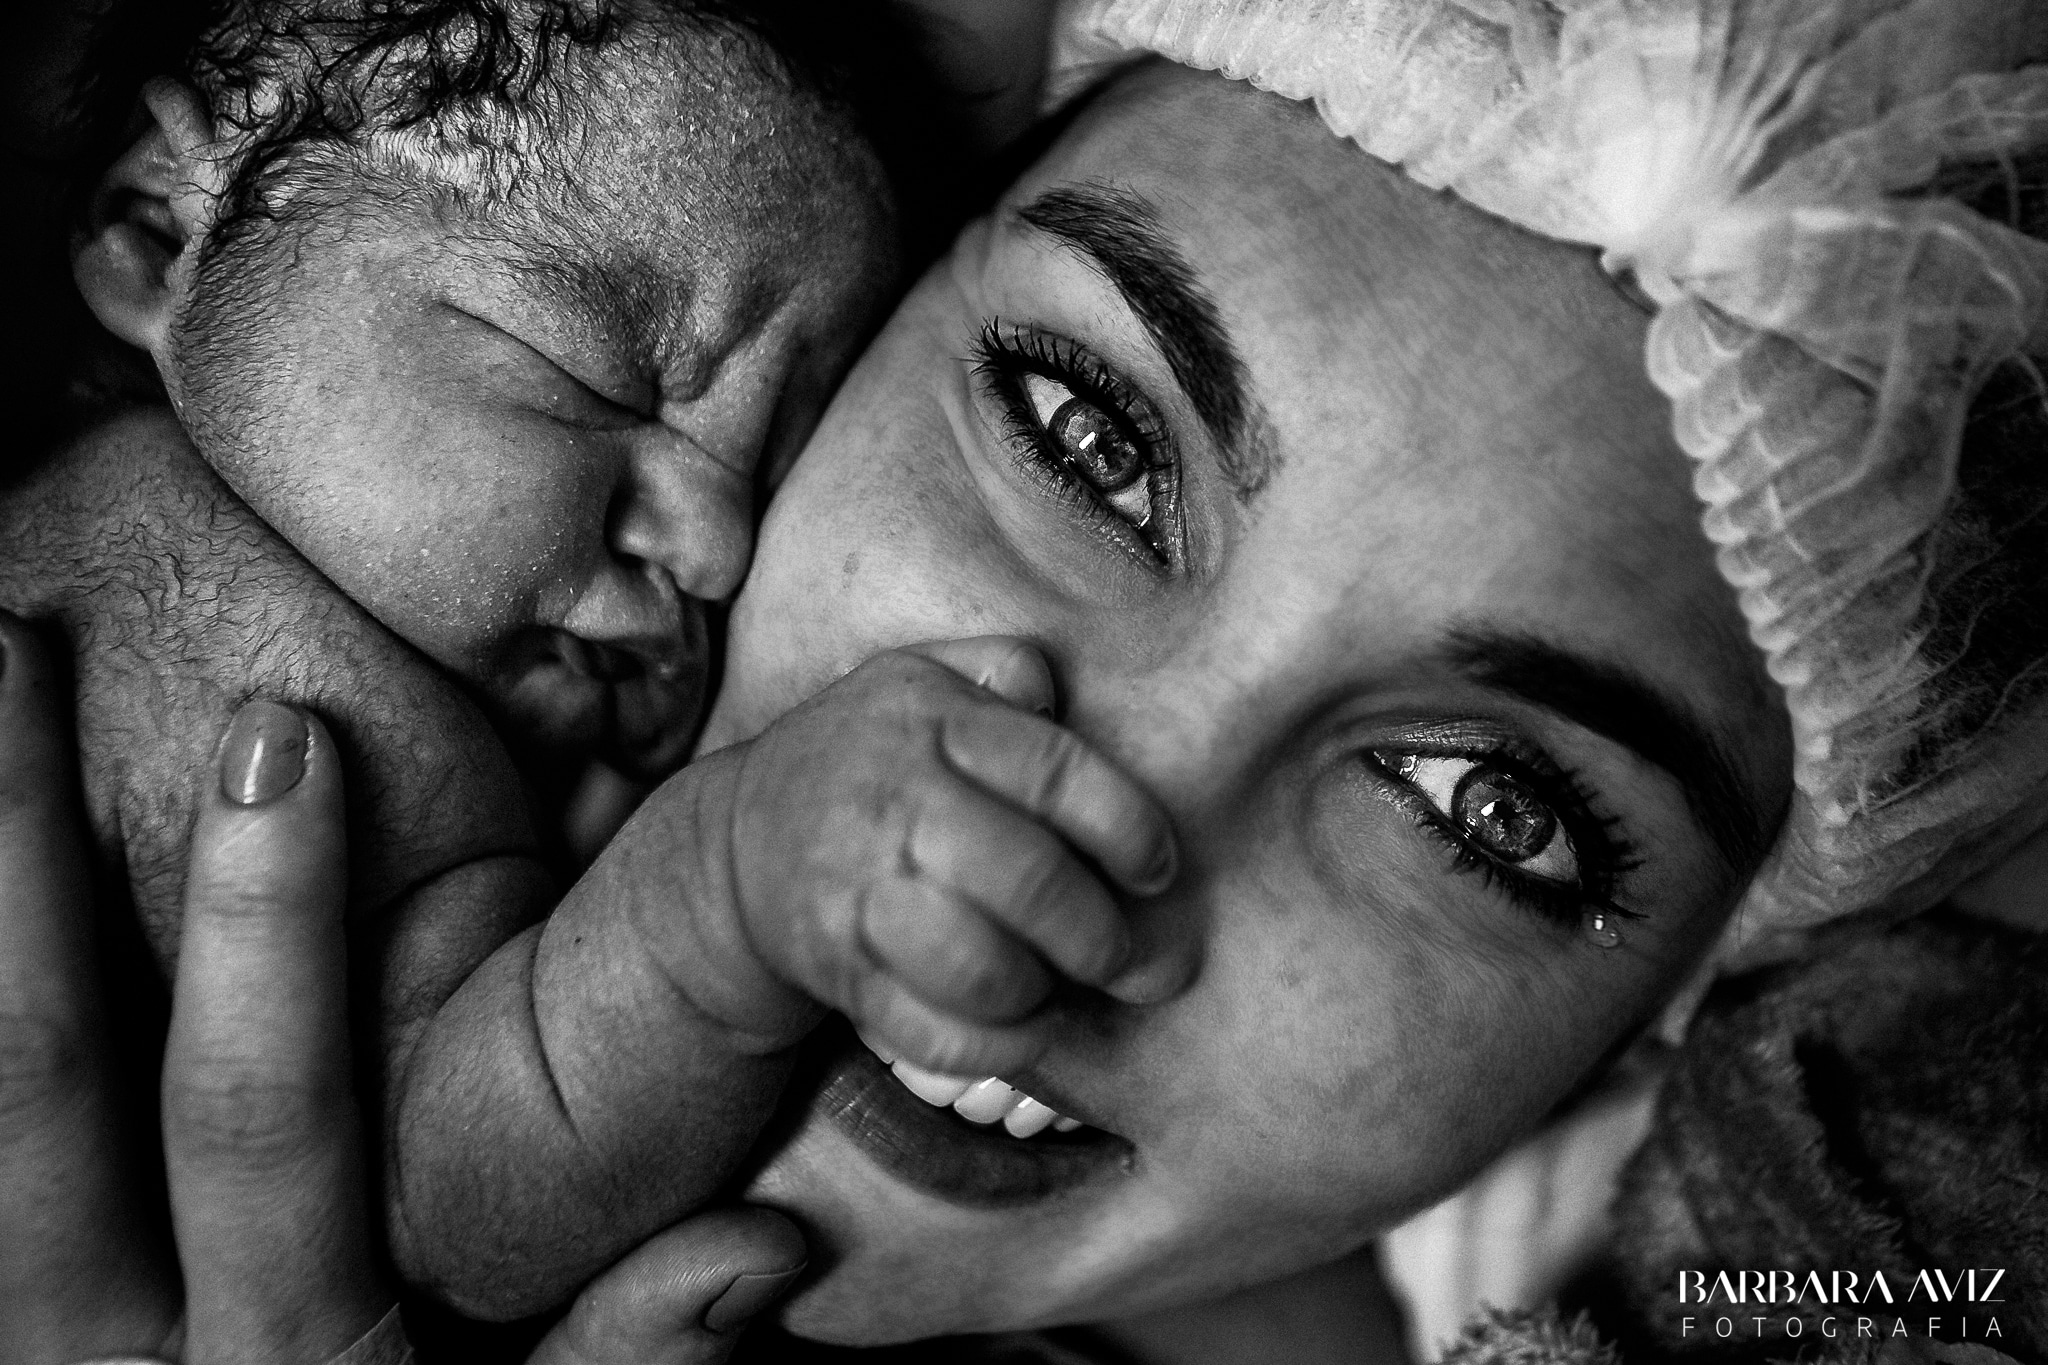 Winners of the 2022 Birth Photography Image Competition